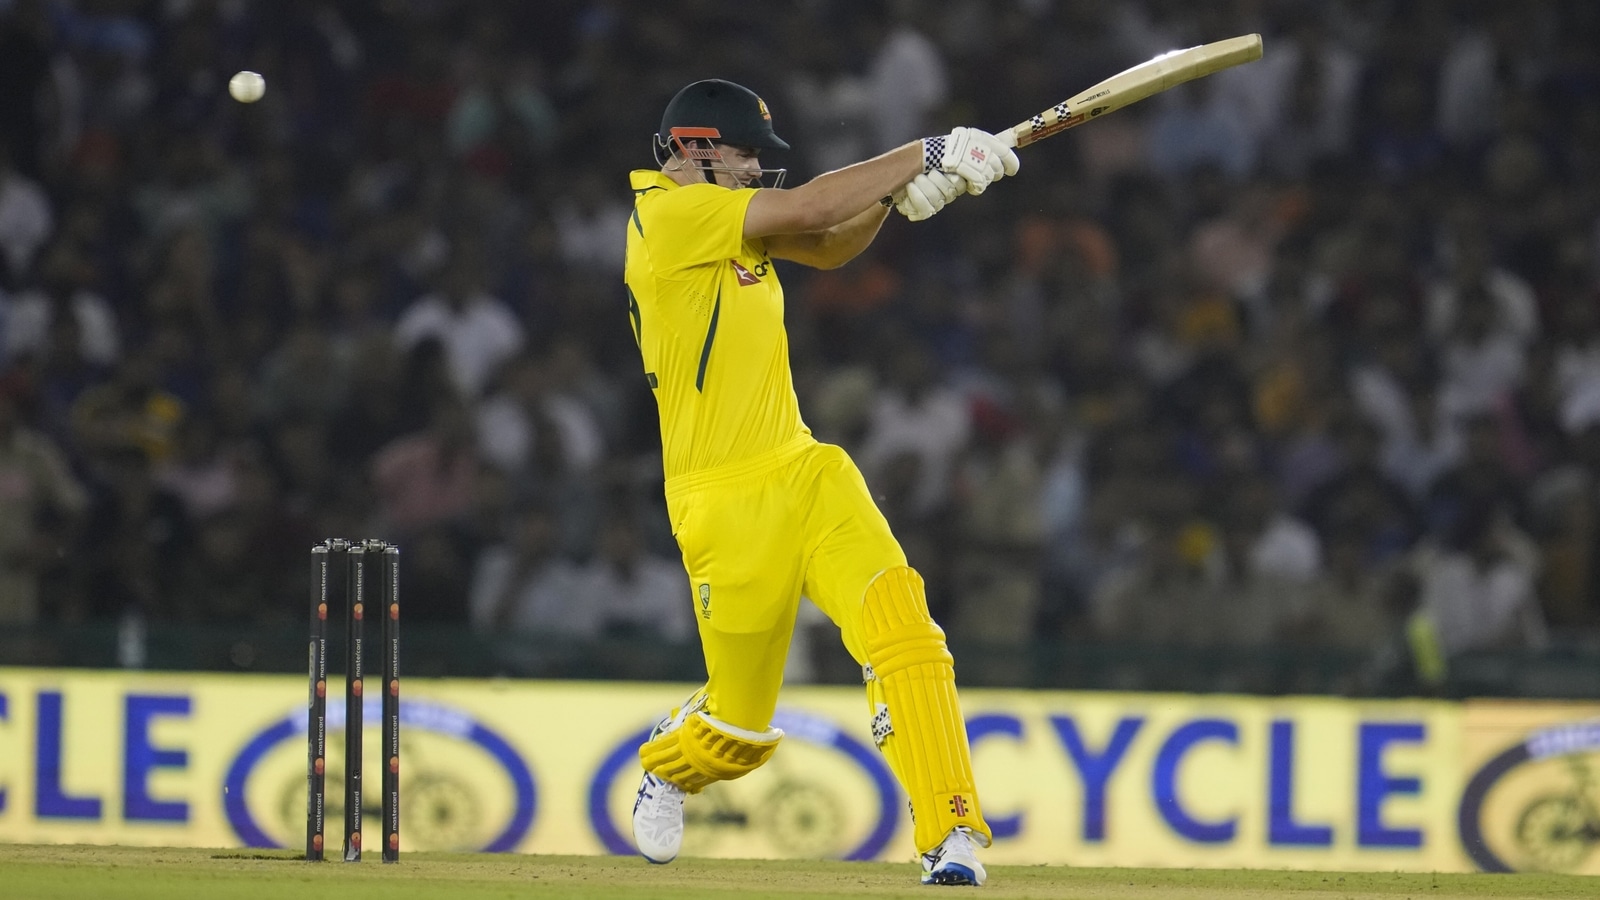 India vs Australia 1st T20 Highlights Cameron Green, Matthew Wade help AUS beat IND by 4 wickets, lead series 1-0 Hindustan Times